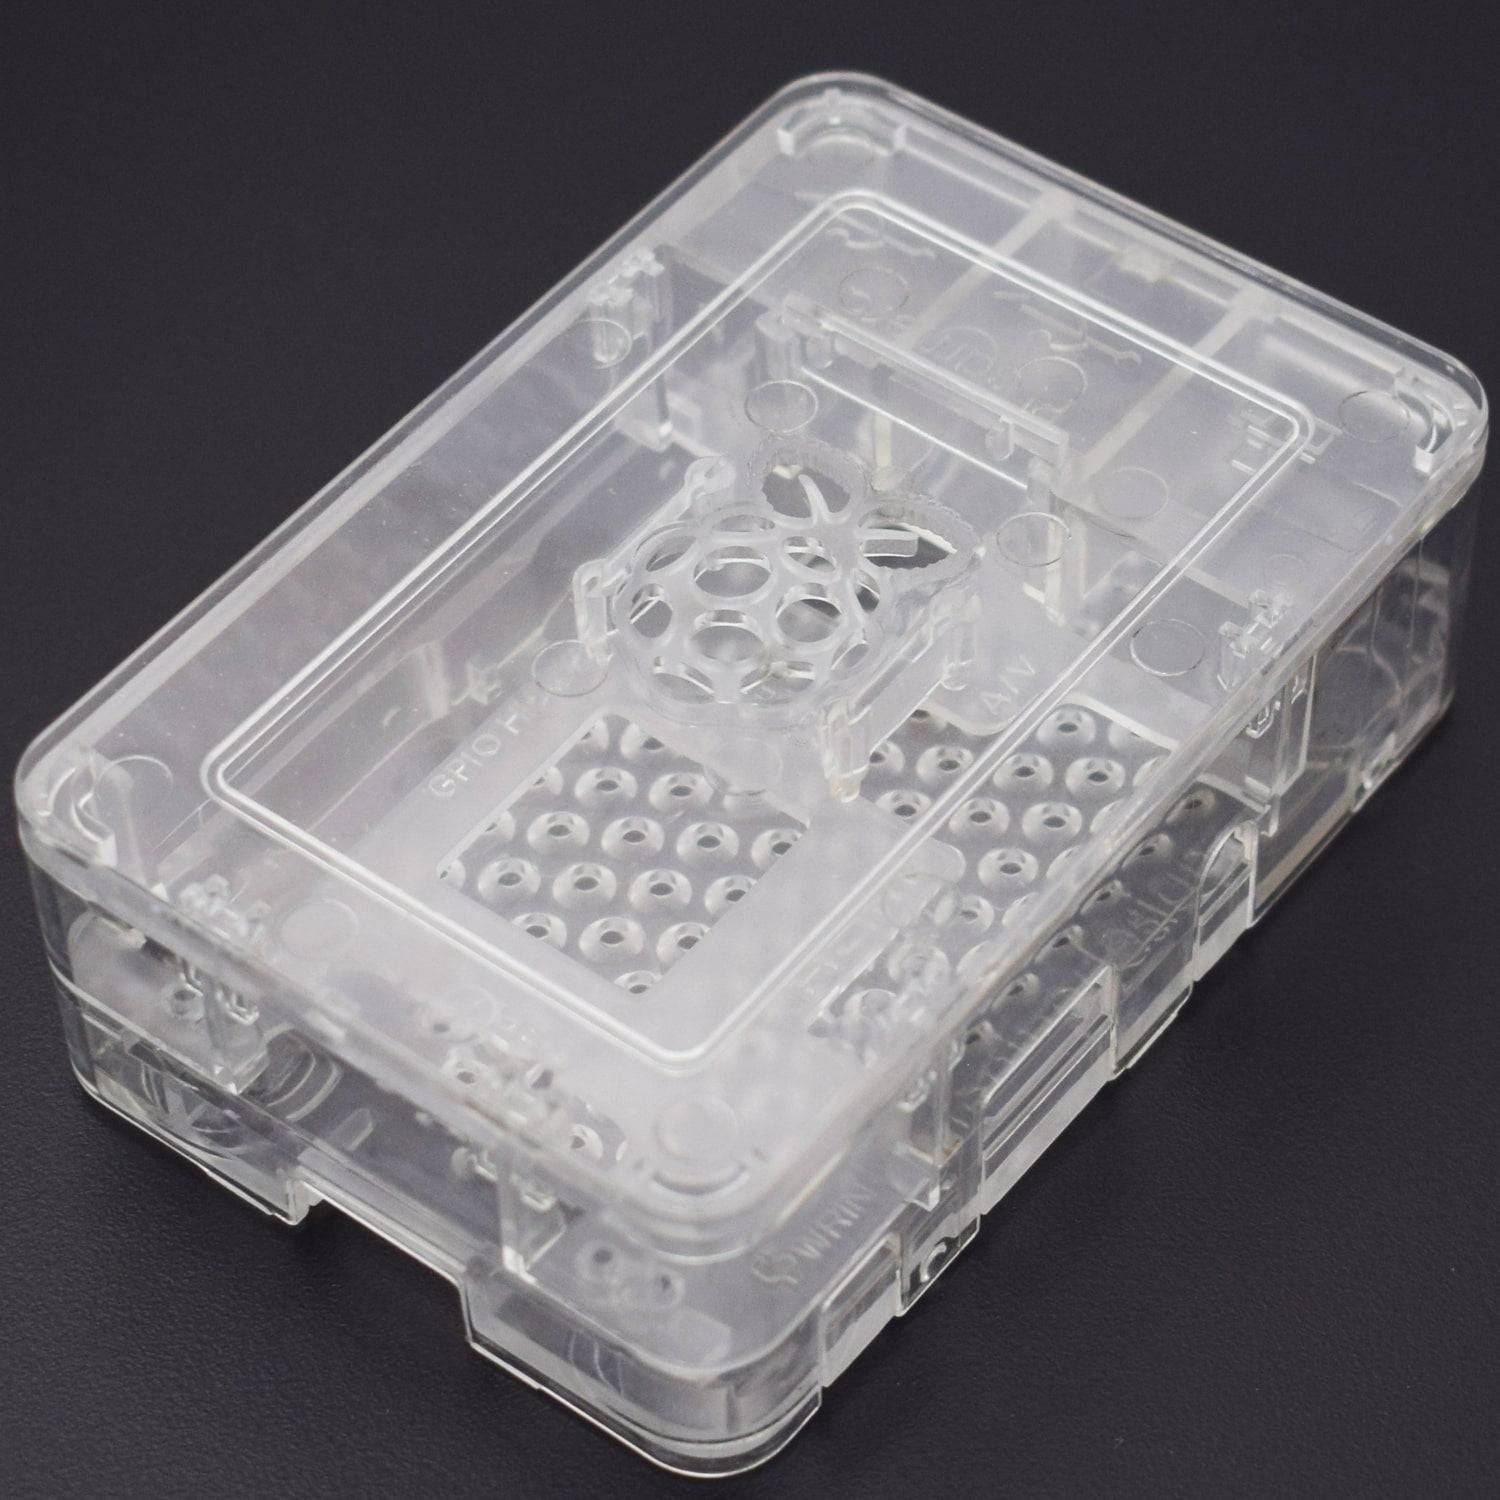 Raspberry Pi ABS Case Metal Enclosure Compatible With Raspberry Pi 3, 2 Model B And B Plus - RS998 - REES52